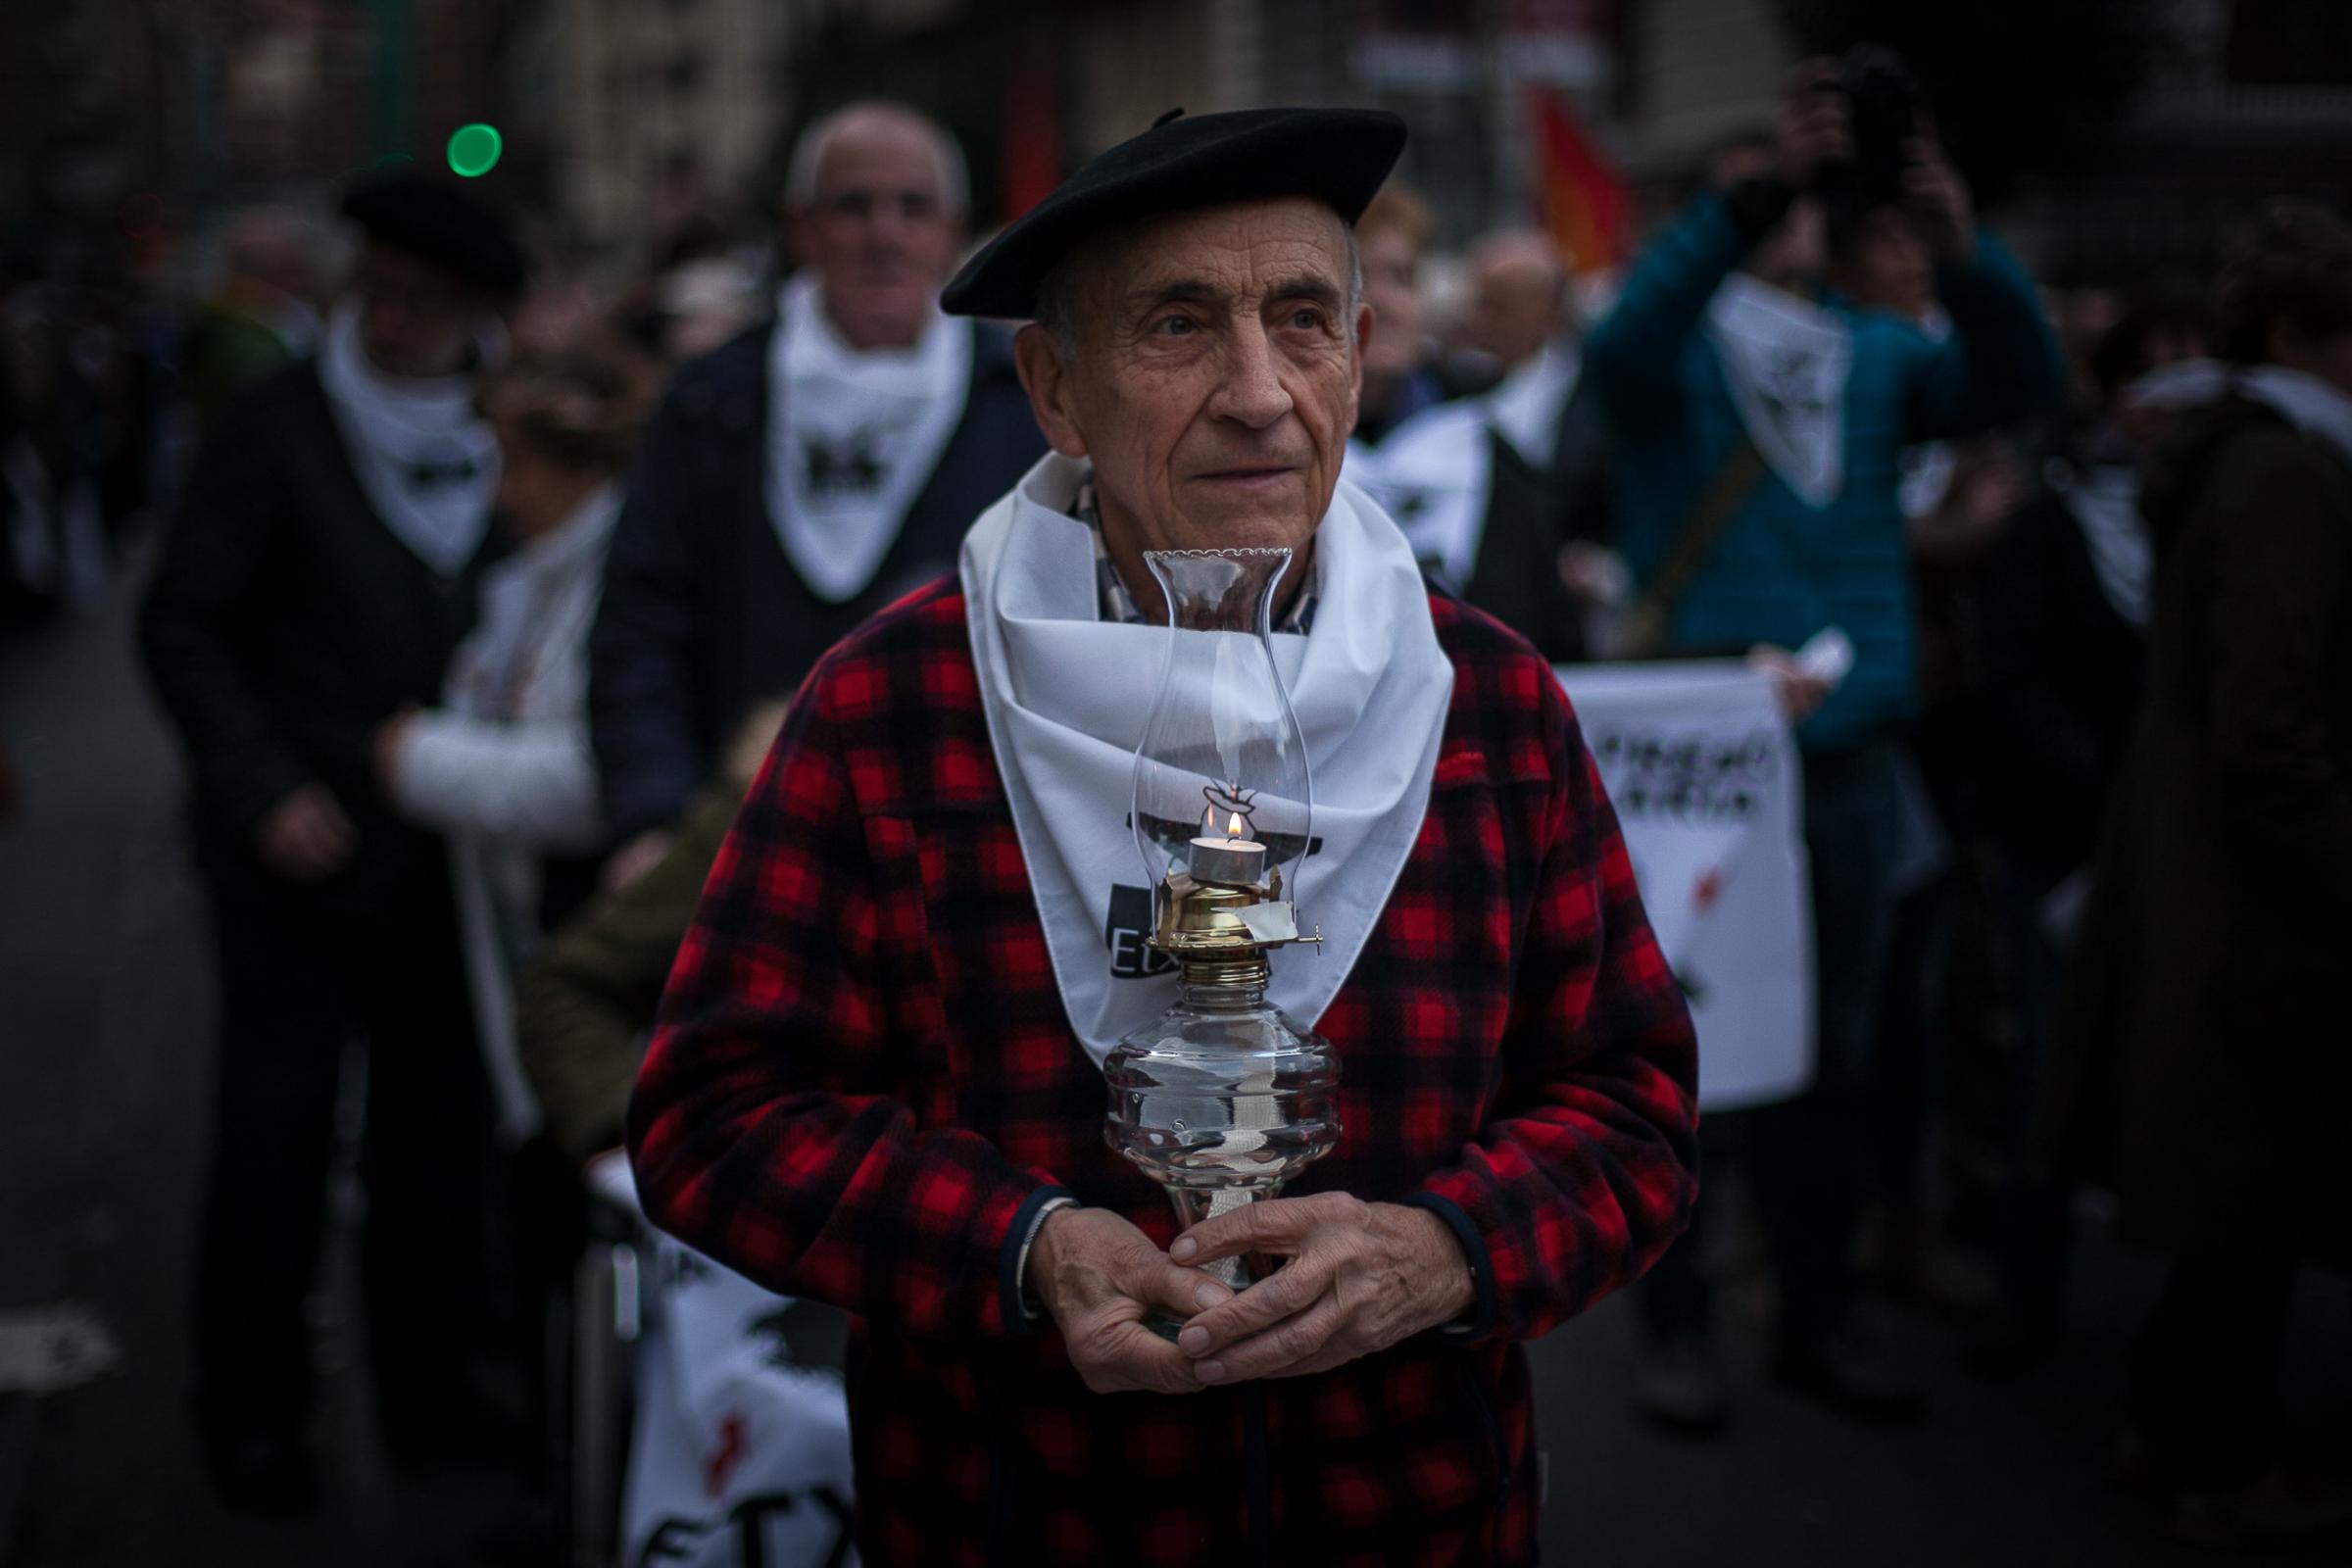 Basque Country - A relative of an ETA prisoner demonstrates in the streets of Bilbao, asking him to serve his...